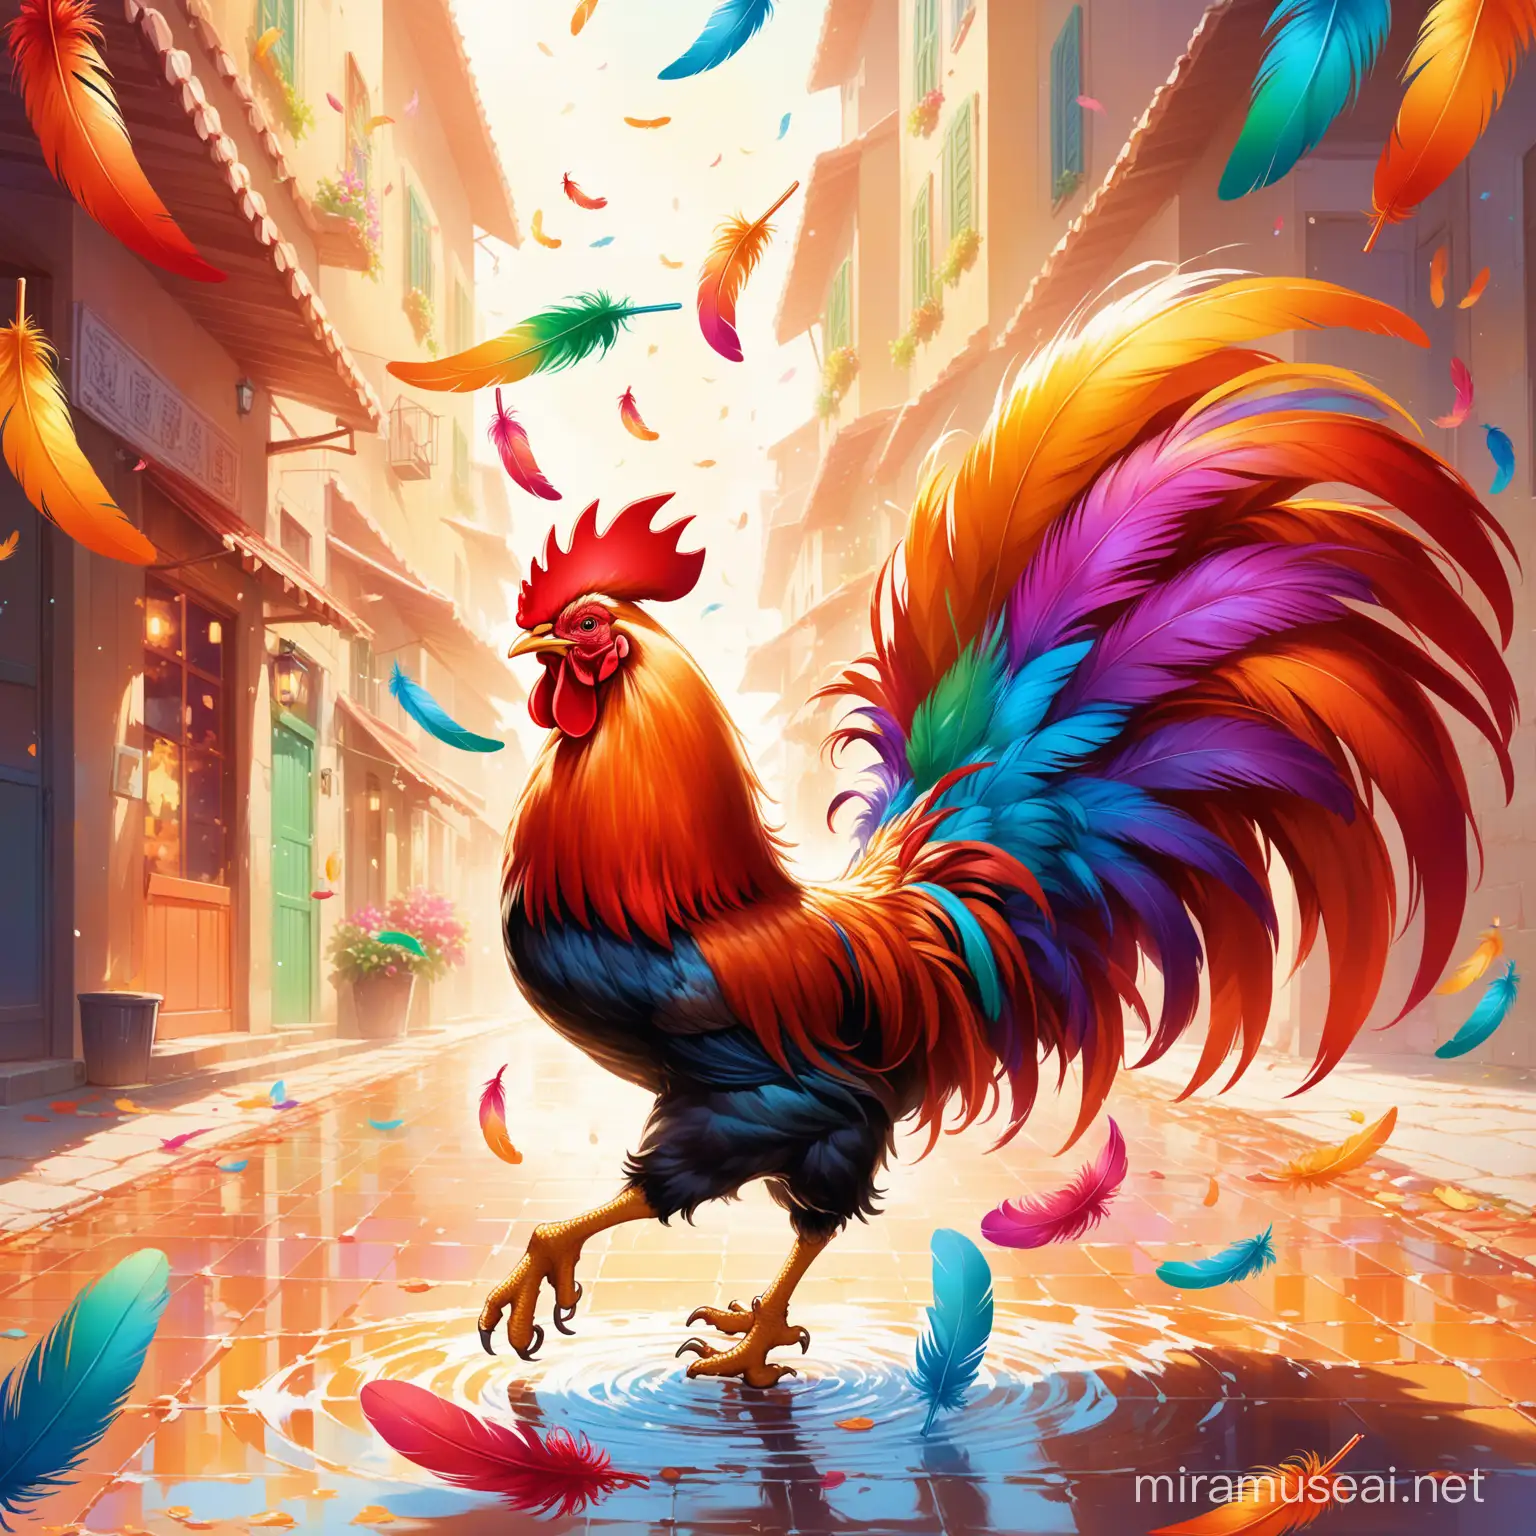 Colorful Feathered Rooster in Playful Motion